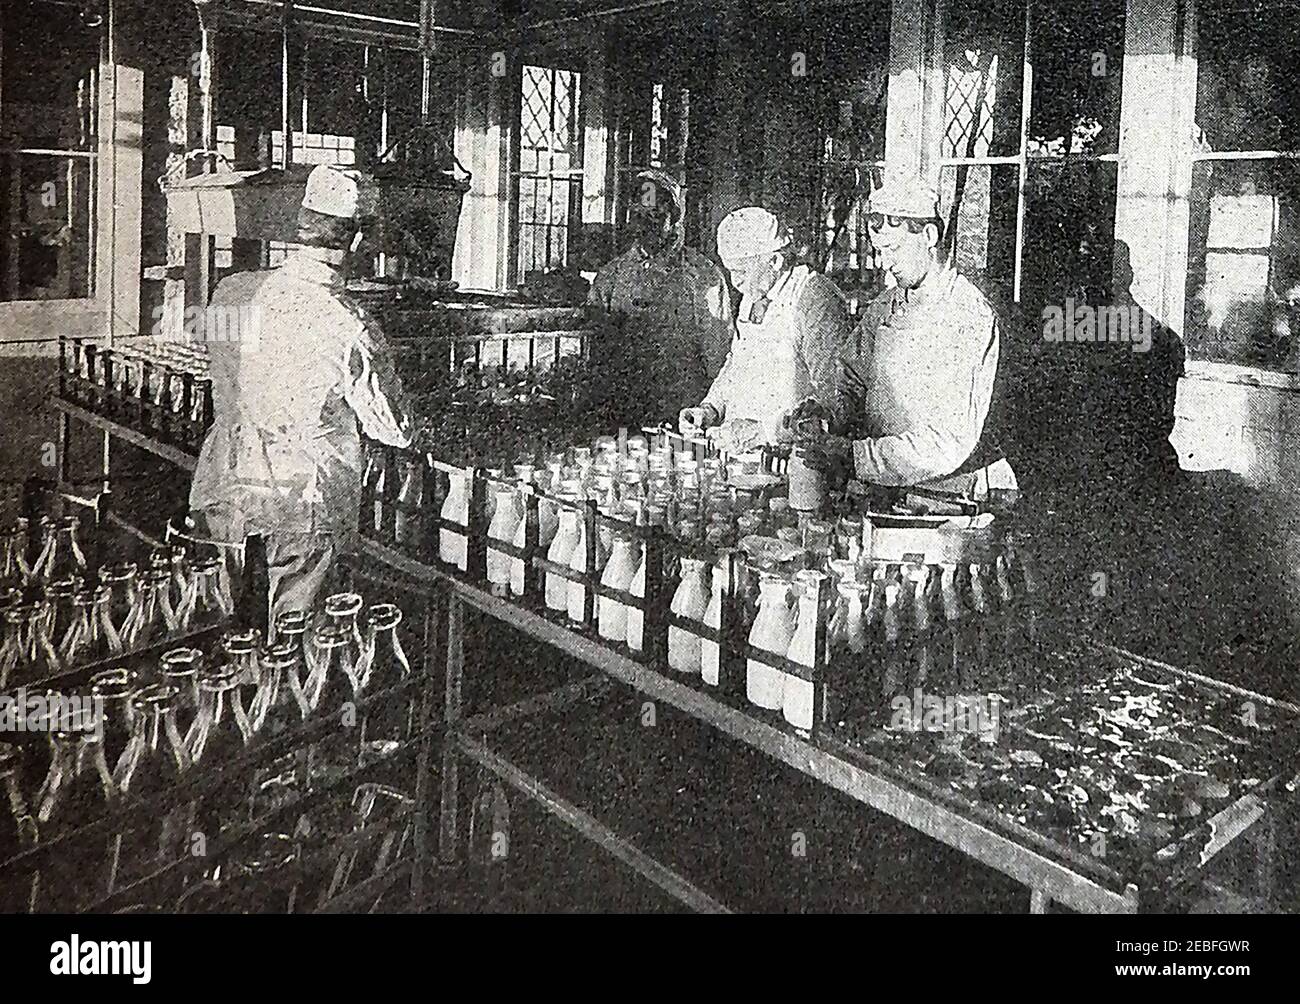 An early  1930's printed photograph taken in a milk bottling plant in a 1930's British dairy. The man on the right is seen sealing (capping) individual bottles whilst all employees wear white gowns and caps for hygiene purposes. Bottles would have been imbossed with the dairy's name. Stock Photo